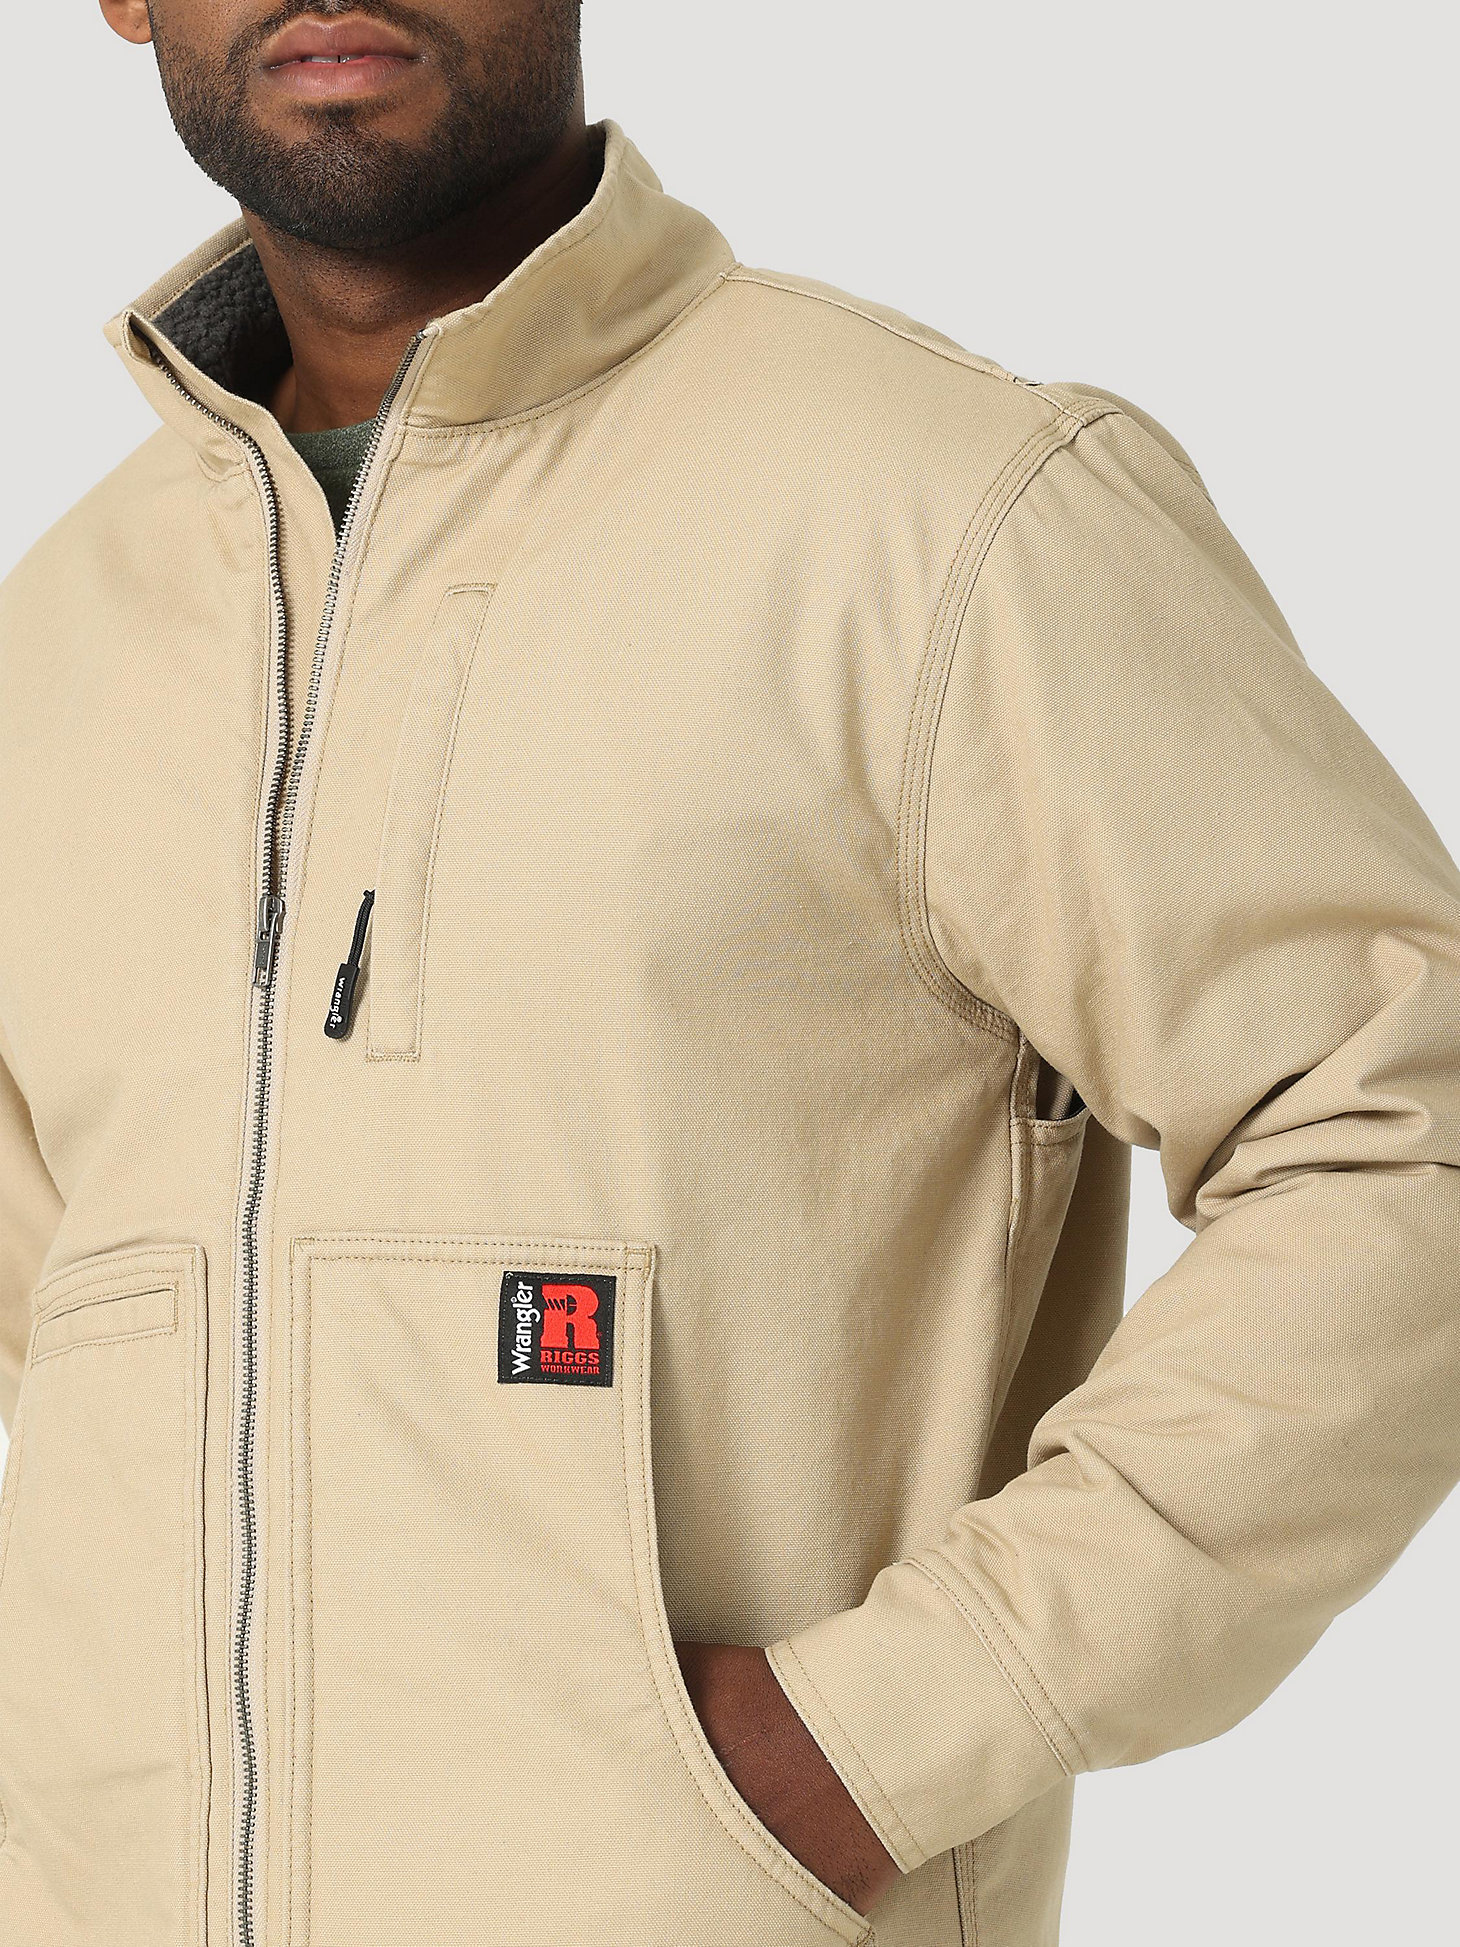 RIGGS Tough Layers Sherpa Lined Canvas Jacket in Golden Khaki alternative view 6